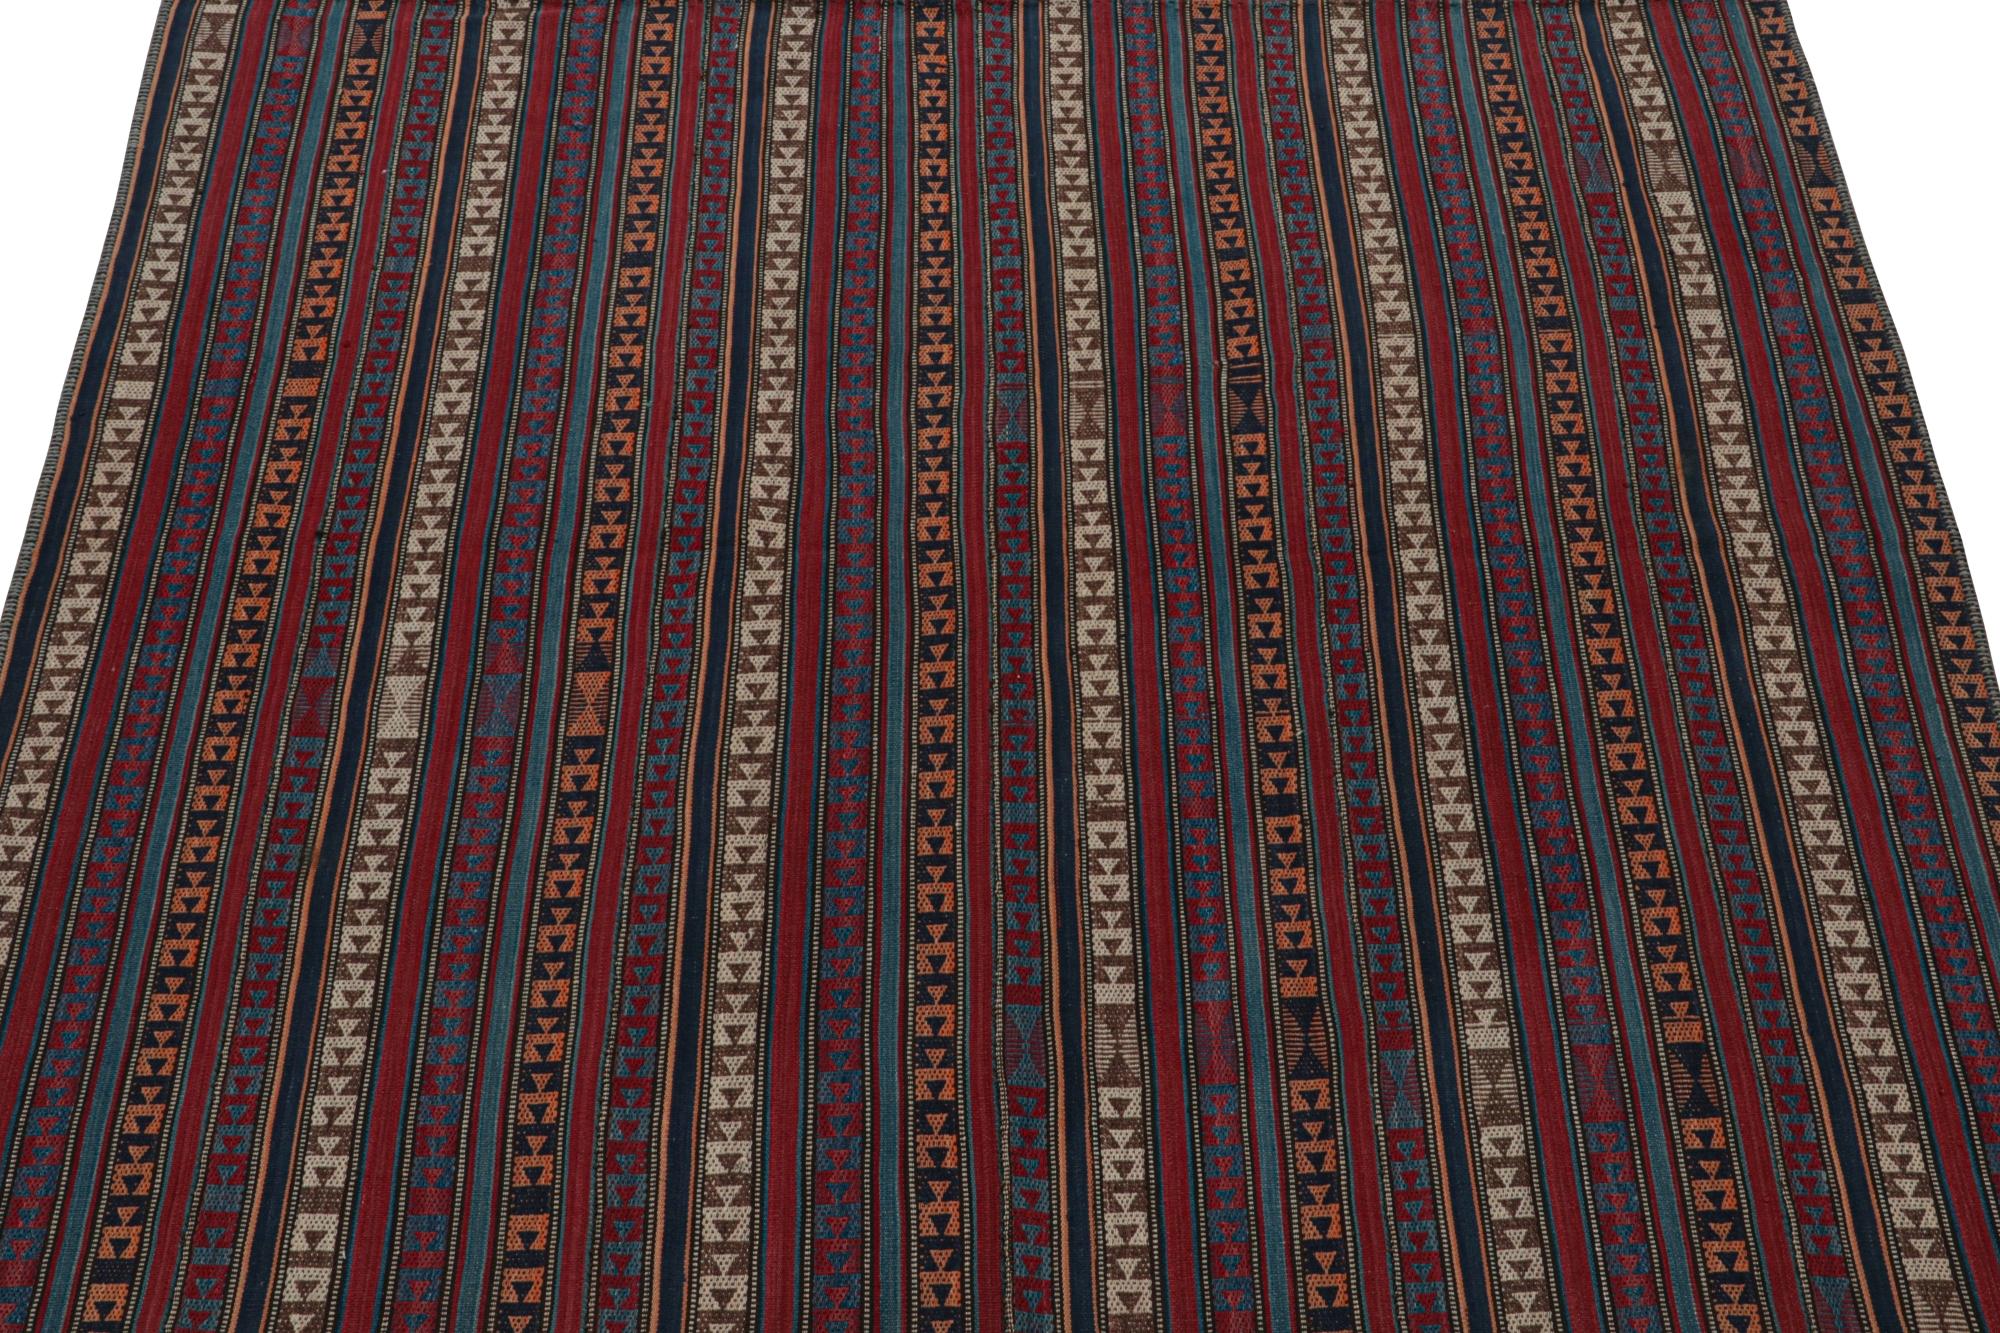 This vintage 5x5 Persian kilim is a mid-century Jajim-style flat weave that hails from the Shahsavan tribe. 

On the Design: 

Jajim Kilims are known for their take on the panel weave style, in which tribal weavers combine multiple pieces into